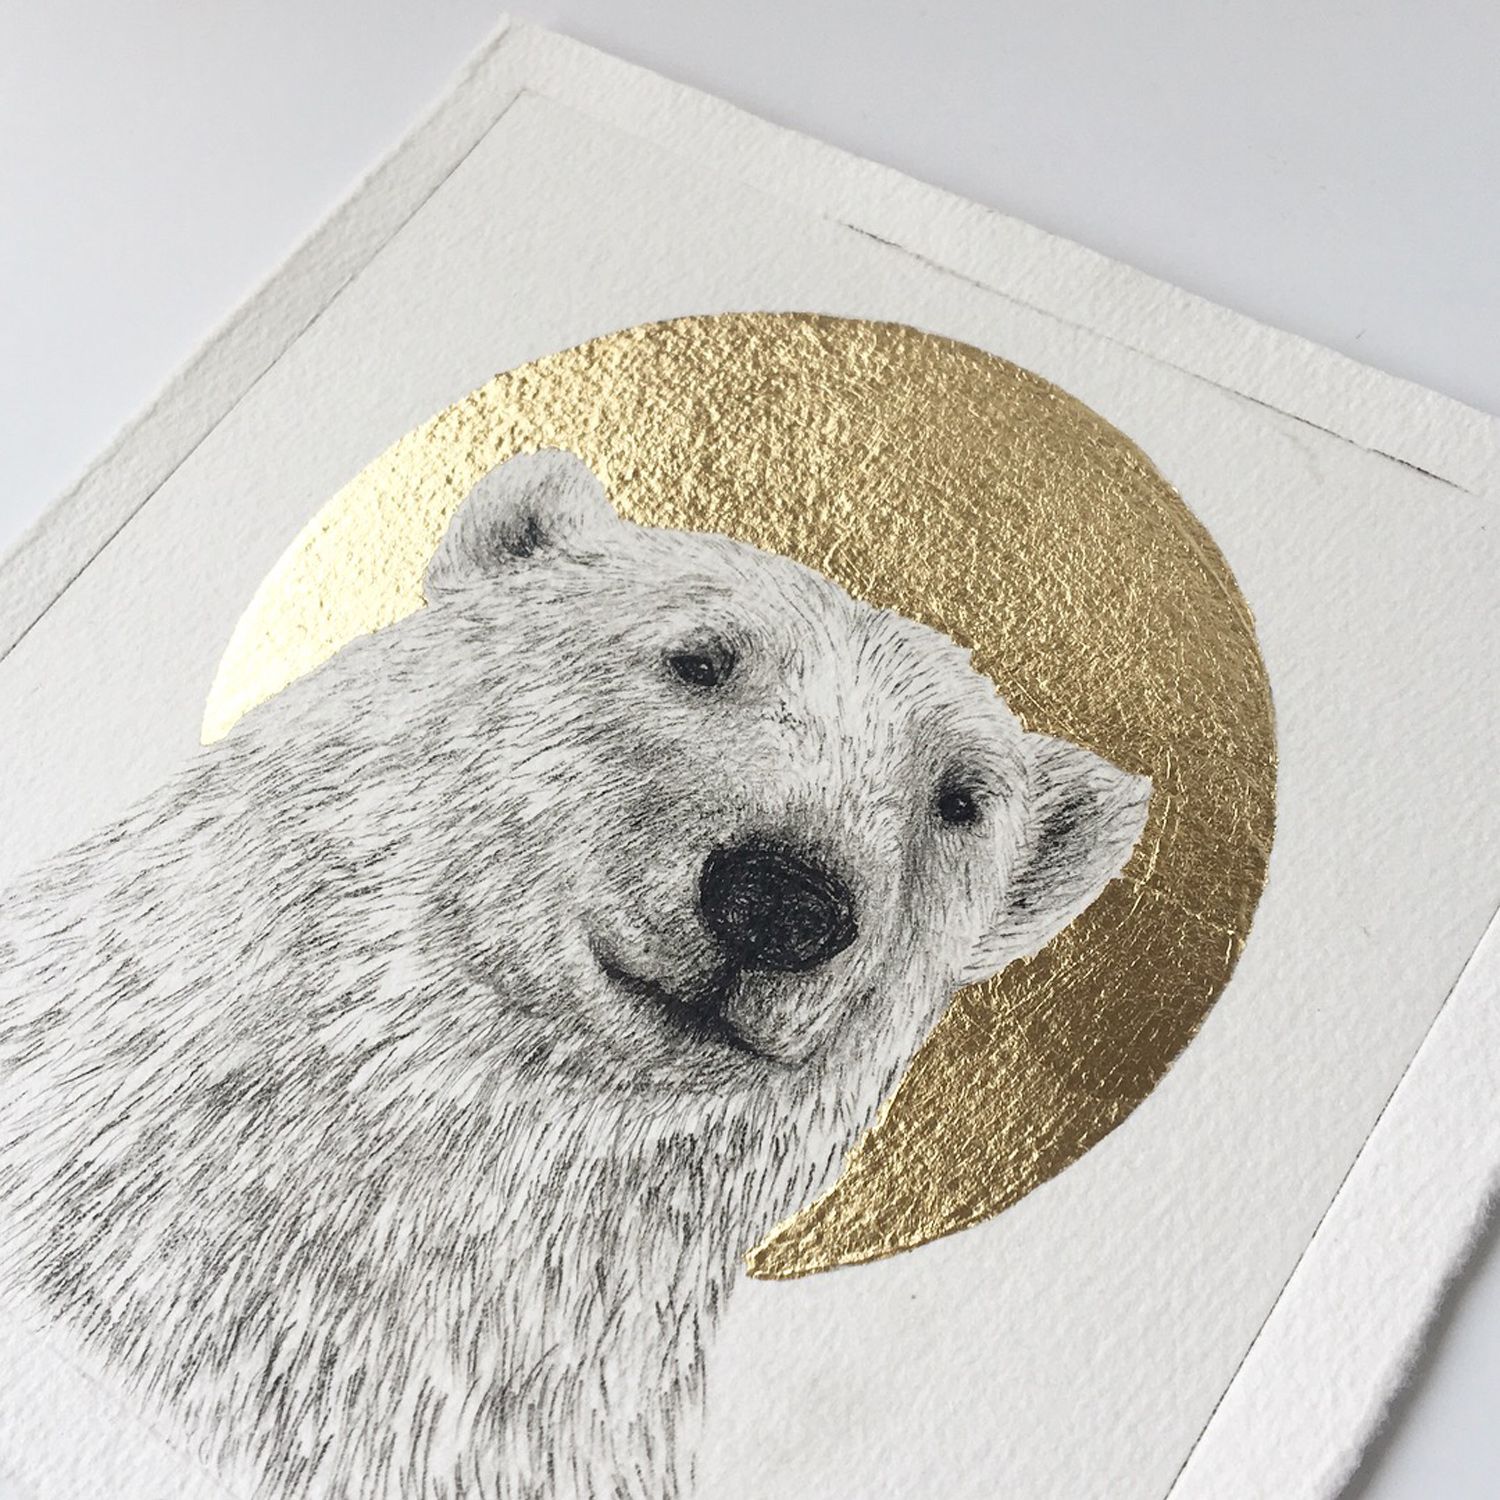 Original dry-point etching and imitation gold leaf on cotton paper. Presenting the polar bear as a sacred and important figure designed and illustrated by helena dore